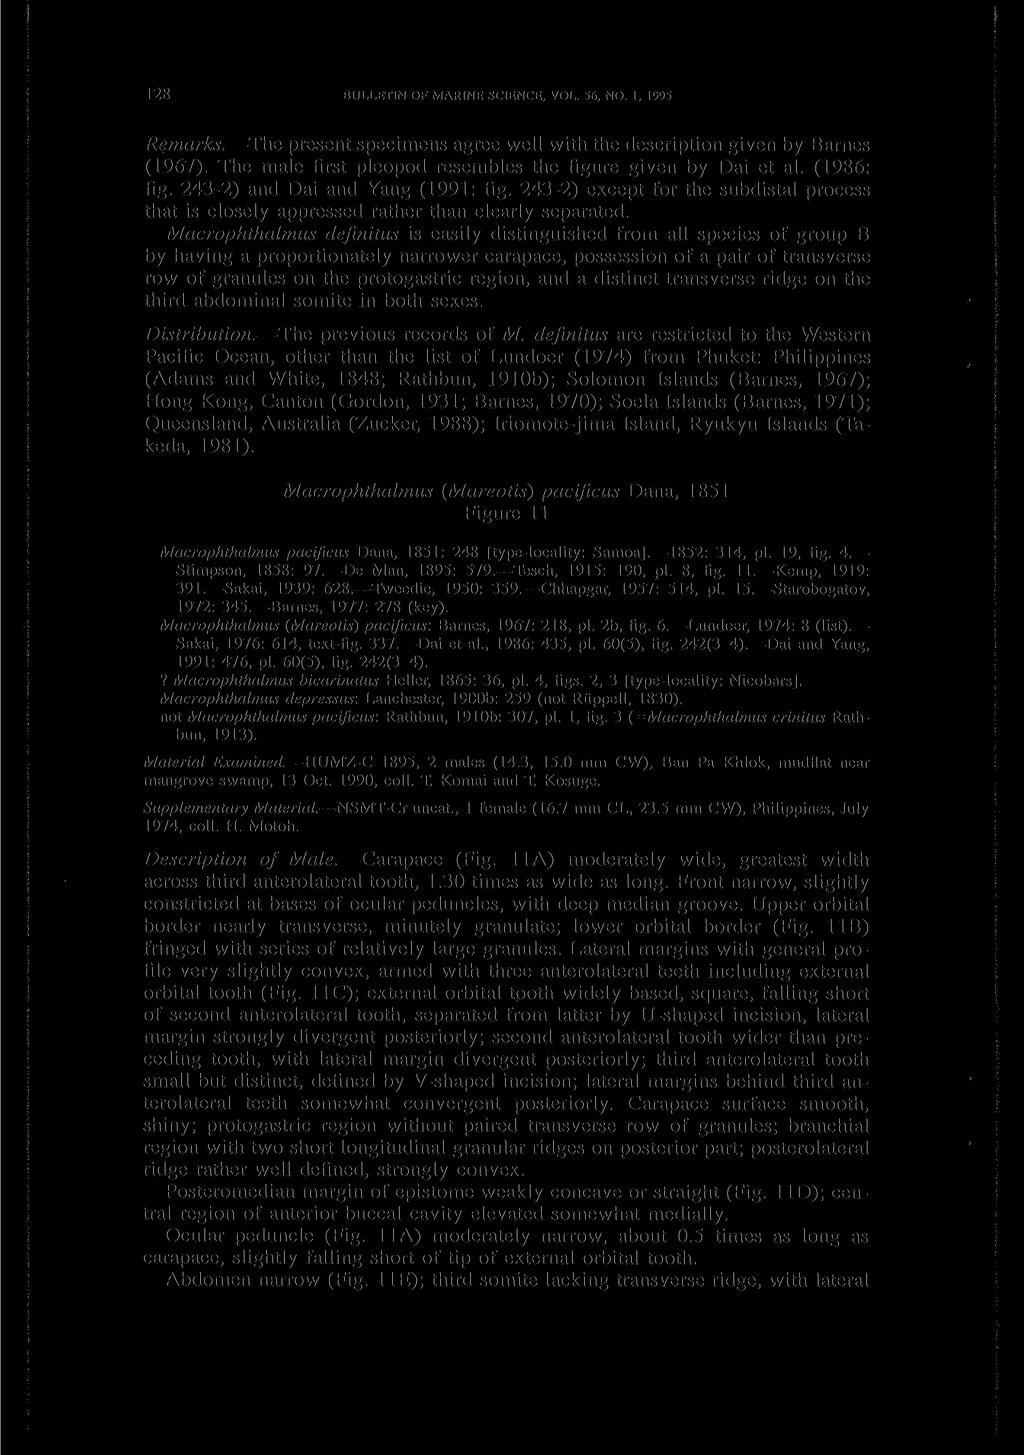 128 BULLETIN OF MARINE SCIENCE, VOL. 56, NO. 1, 1995 Remarks. The present specimens agree well with the description given by Barnes (1967).